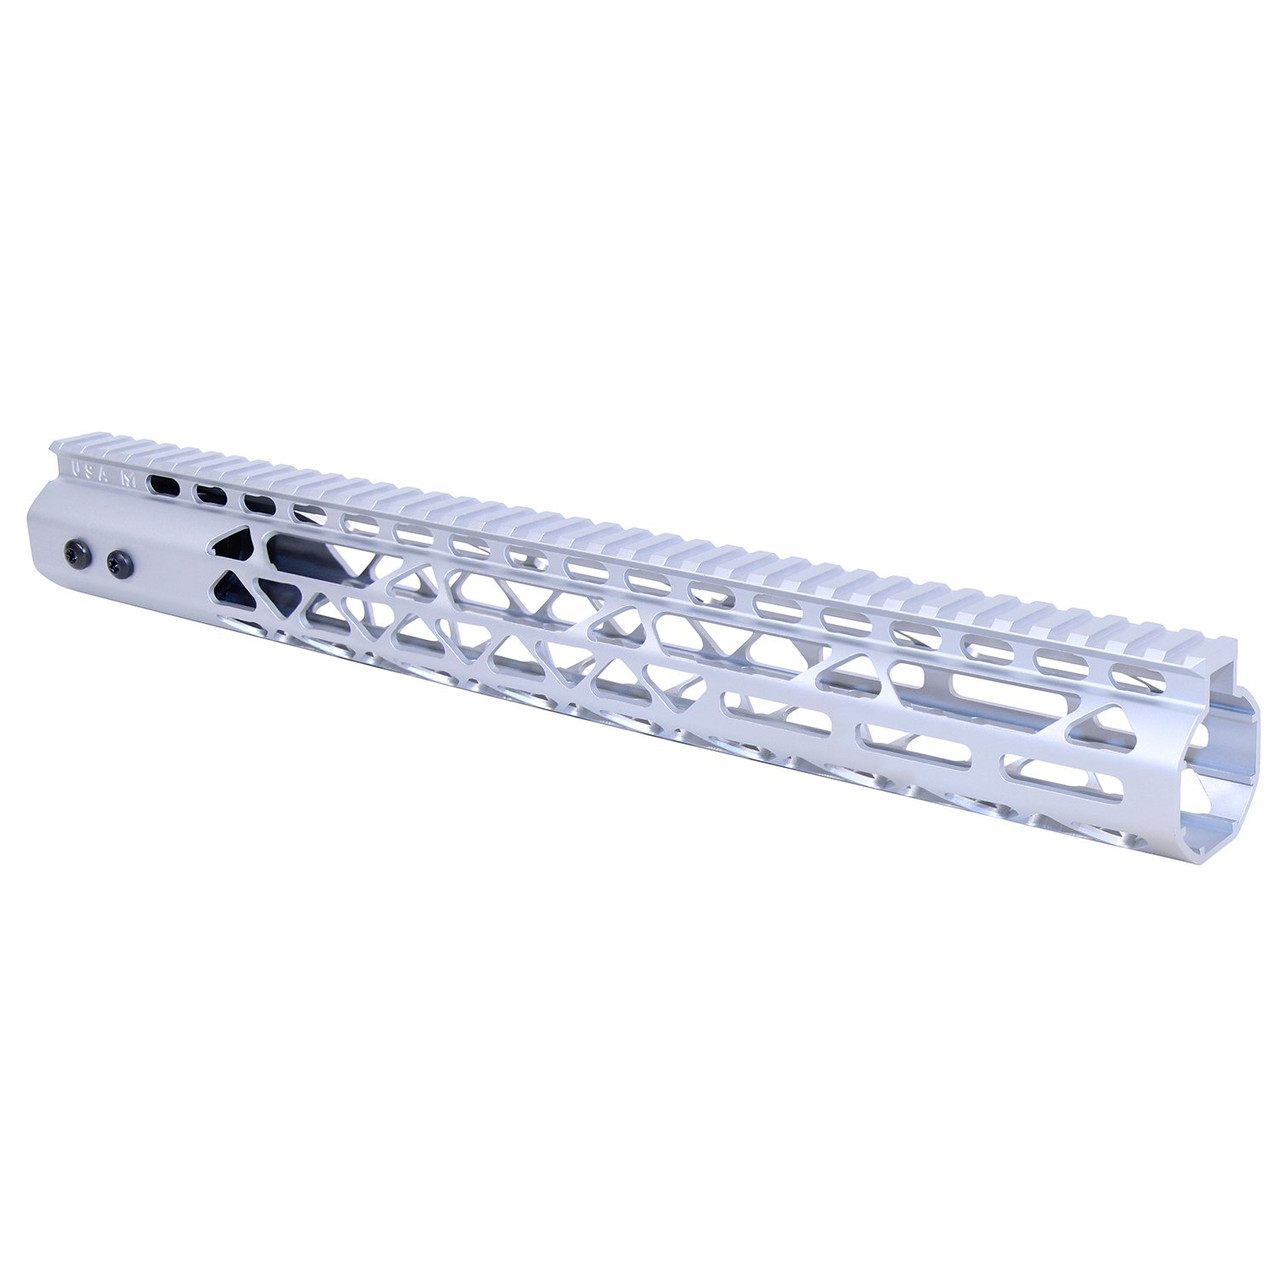 Guntec USA GT-15MLK-AL-308-CLEAR 15" Air Lite Series M-LOK System Free Floating Handguard With Monolithic Top Rail (.308 Cal) (Anodized Clear)